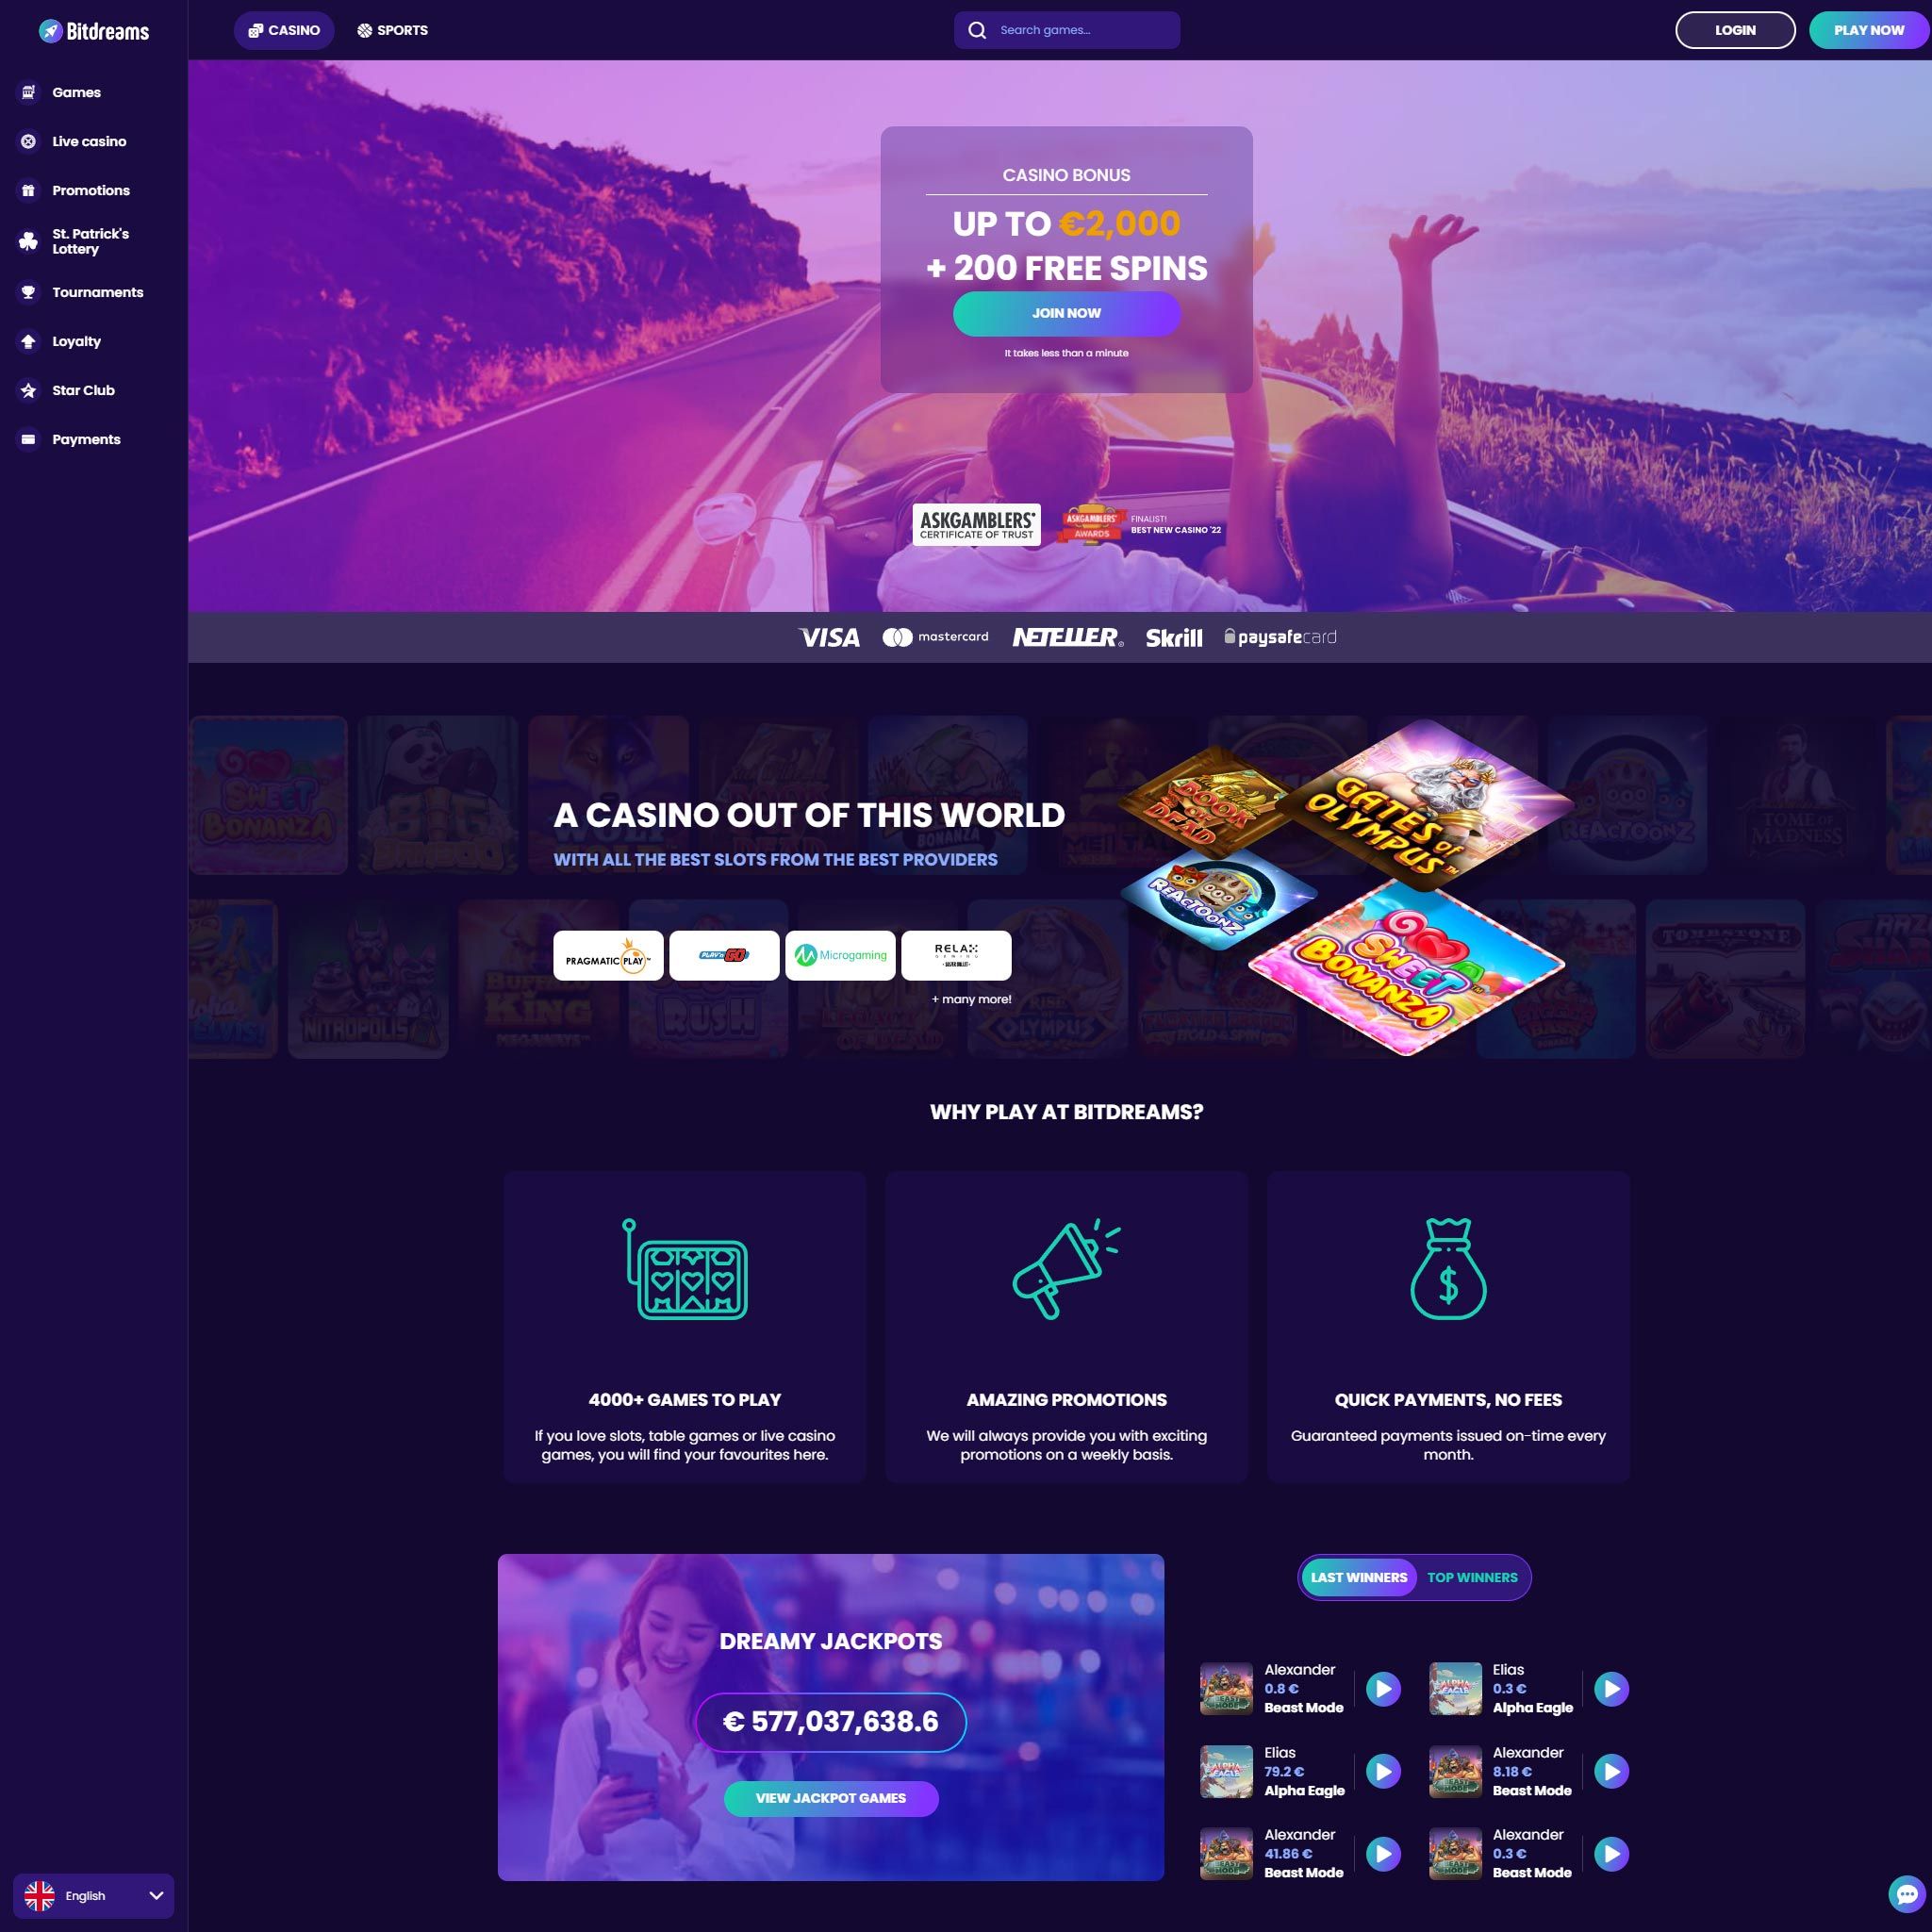 Bitdreams Casino review by Mr. Gamble